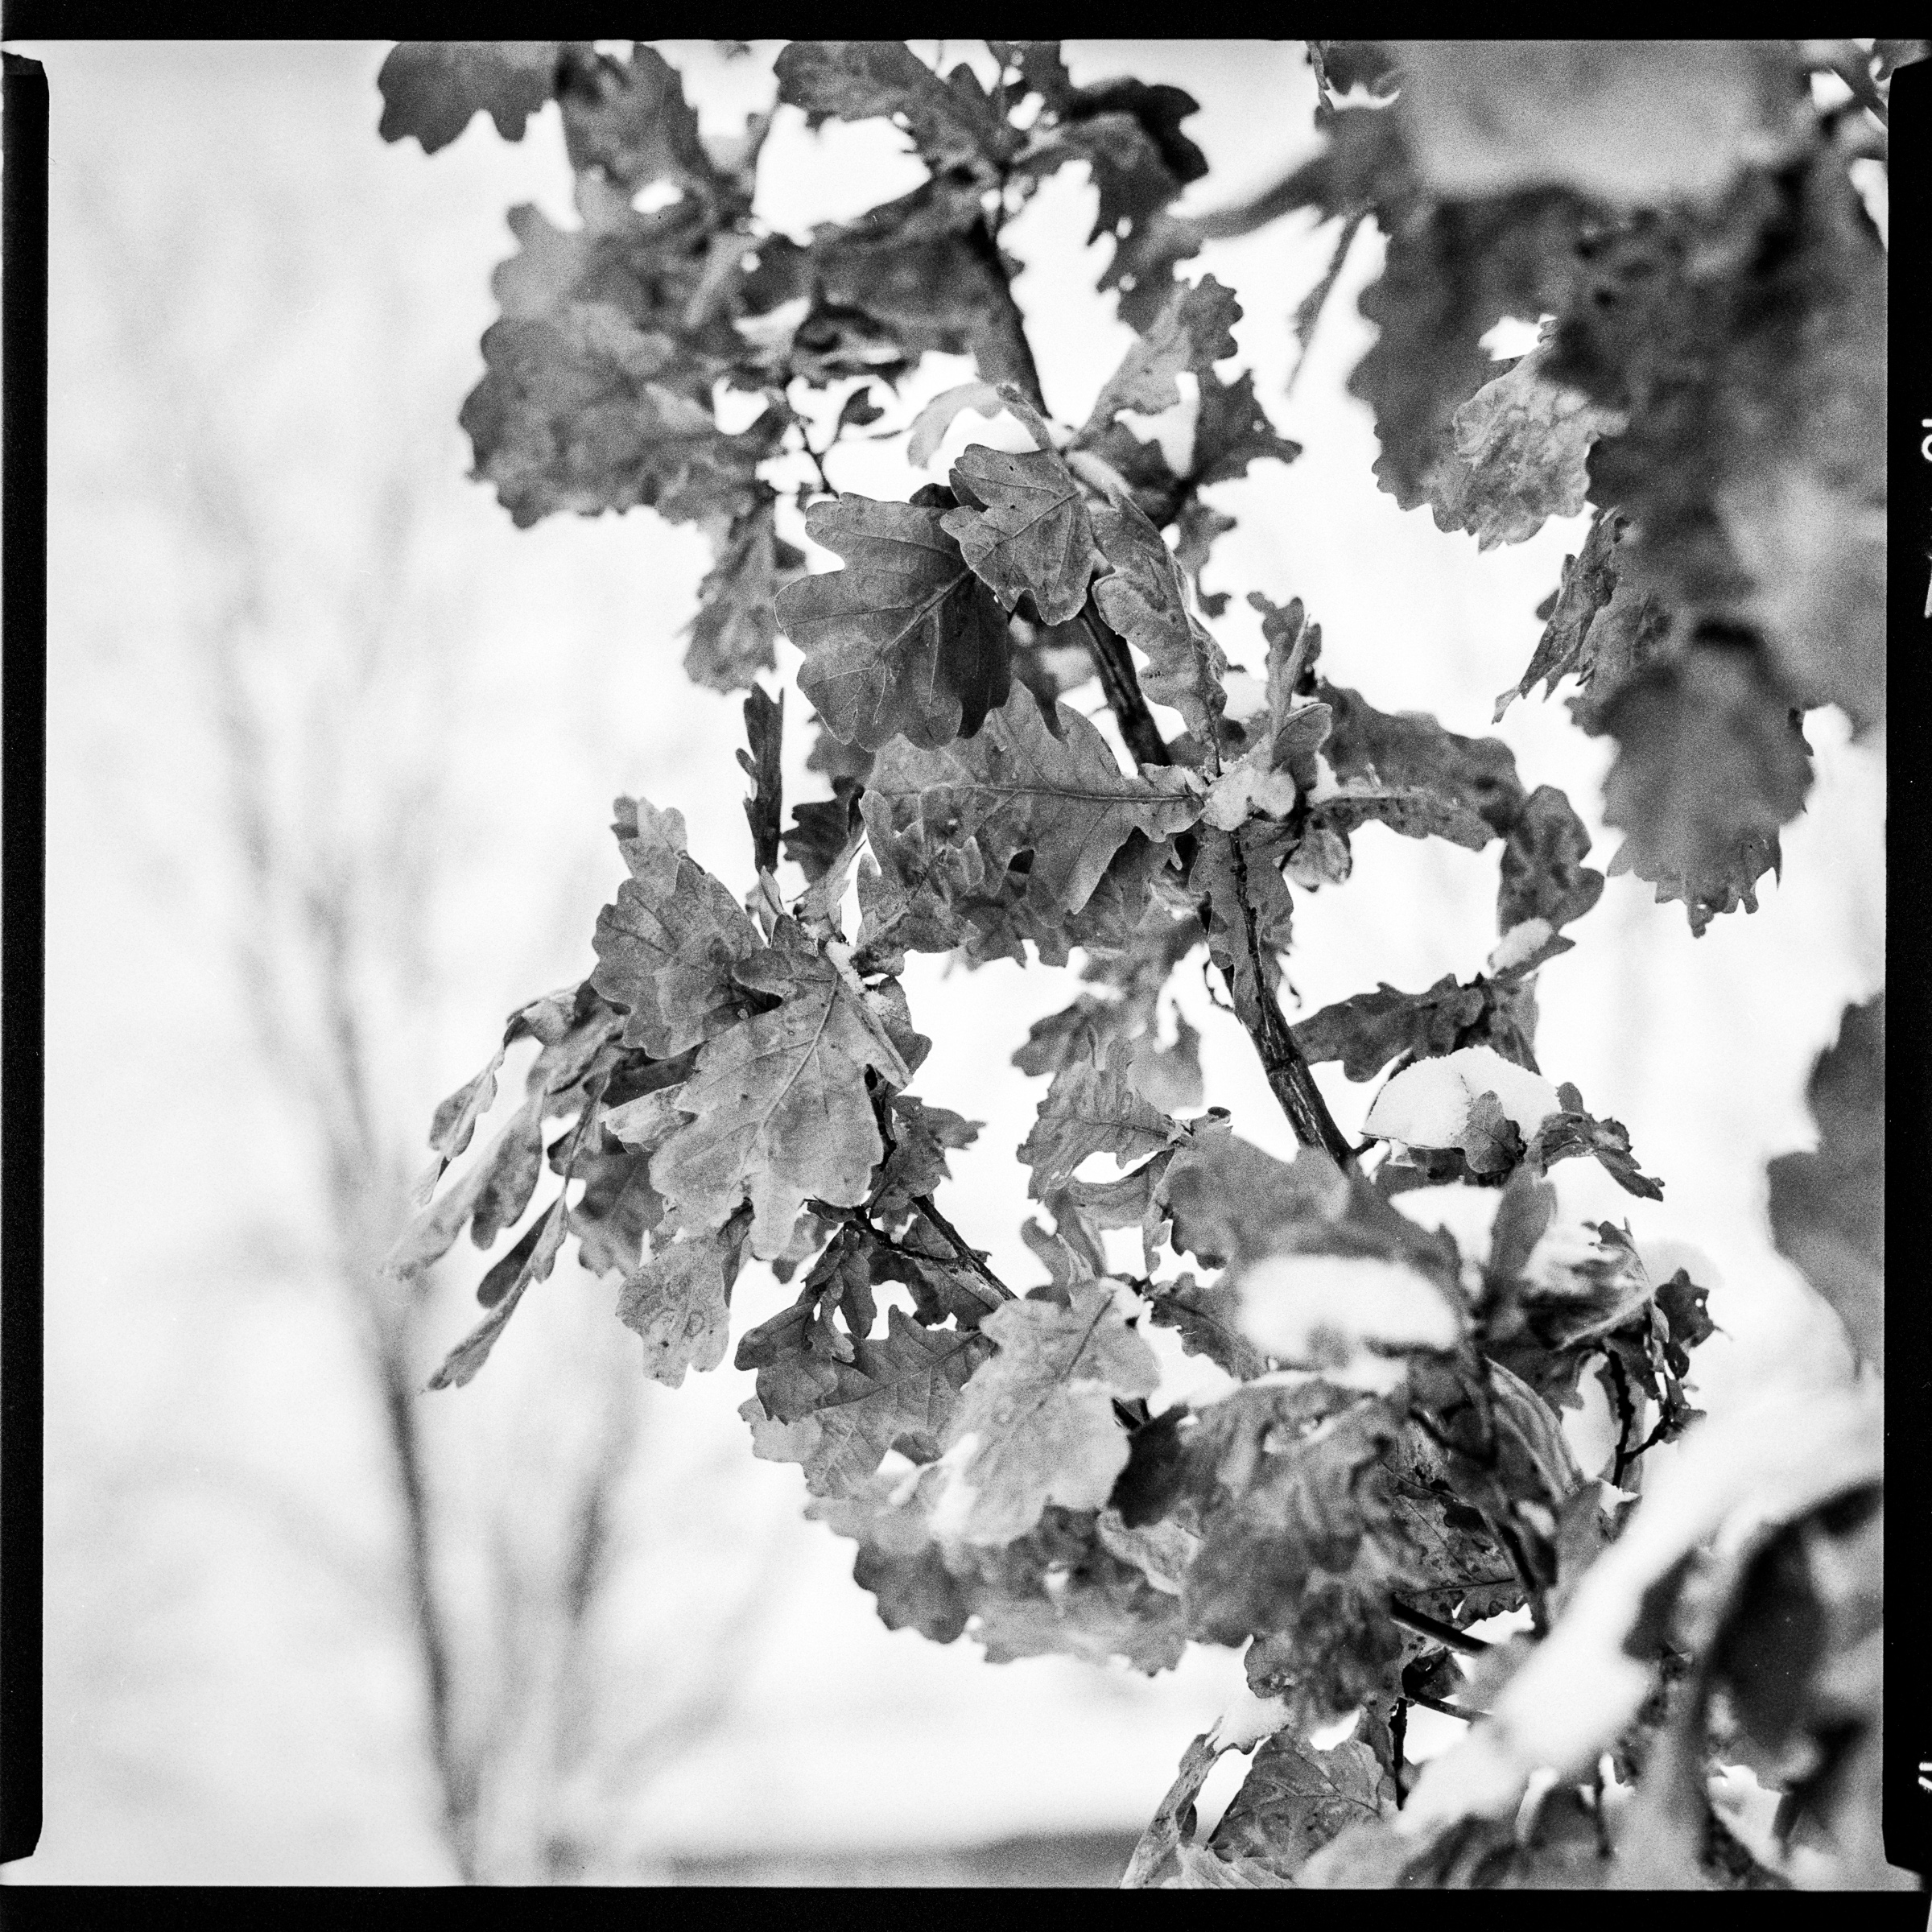 Black and white photo of oak leaves lined with frost against a white snowy background